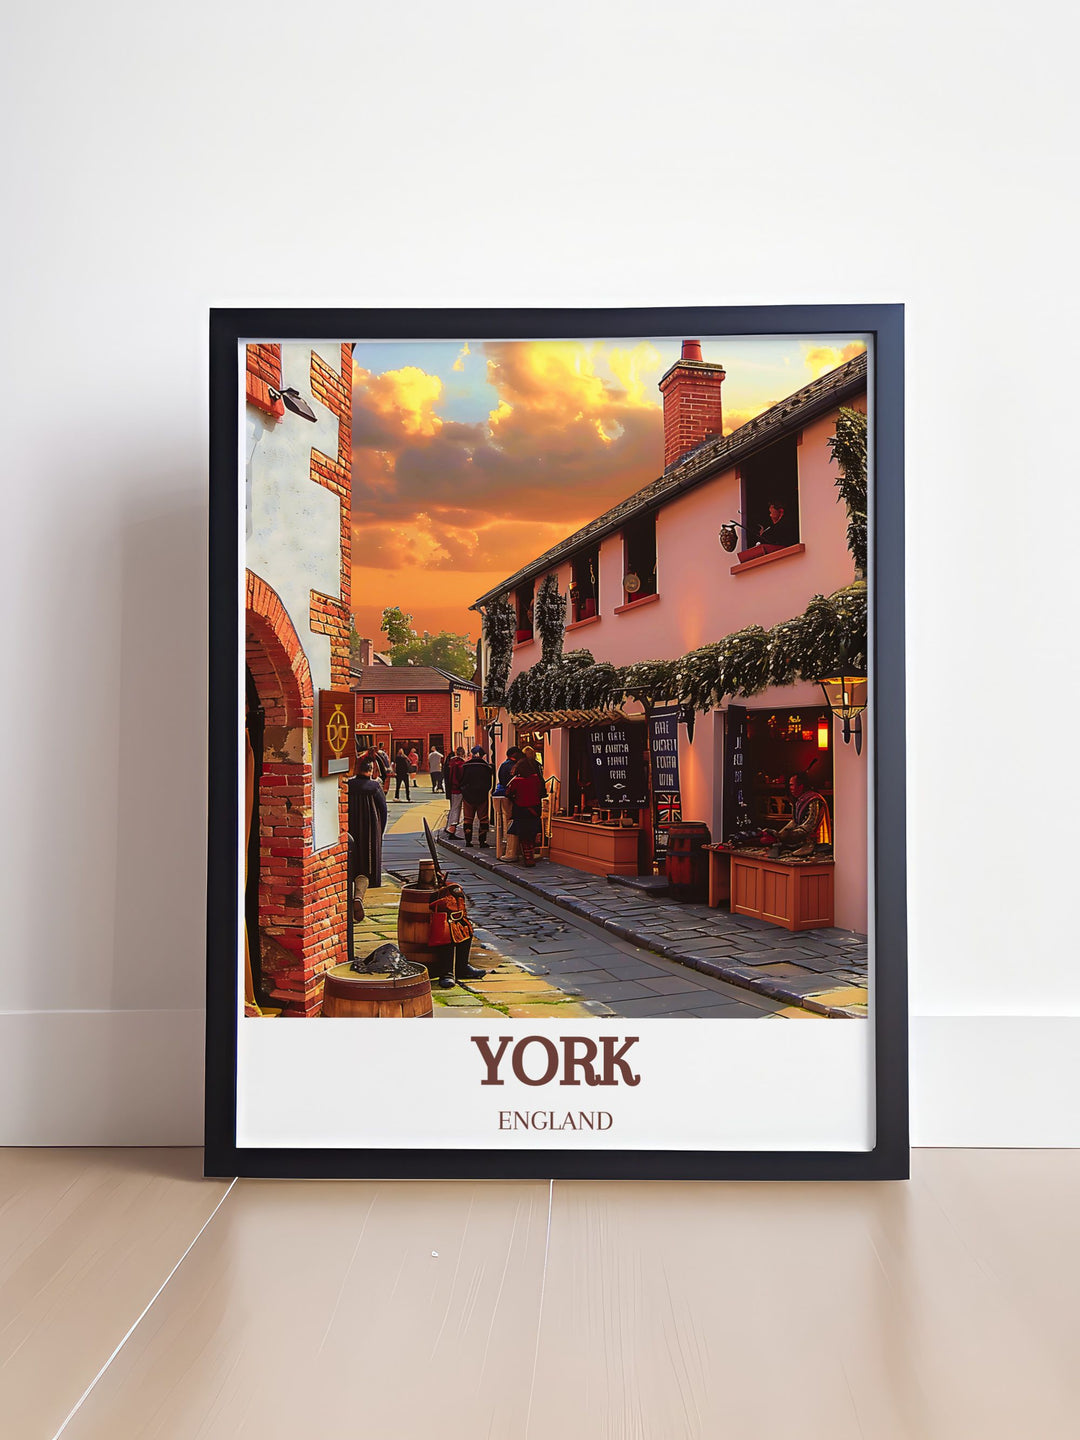 North York Moors art print featuring lush landscapes and serene views. Perfect for home decor enthusiasts who appreciate Yorkshires natural beauty and historical ENGLAND, Jorvik Viking heritage